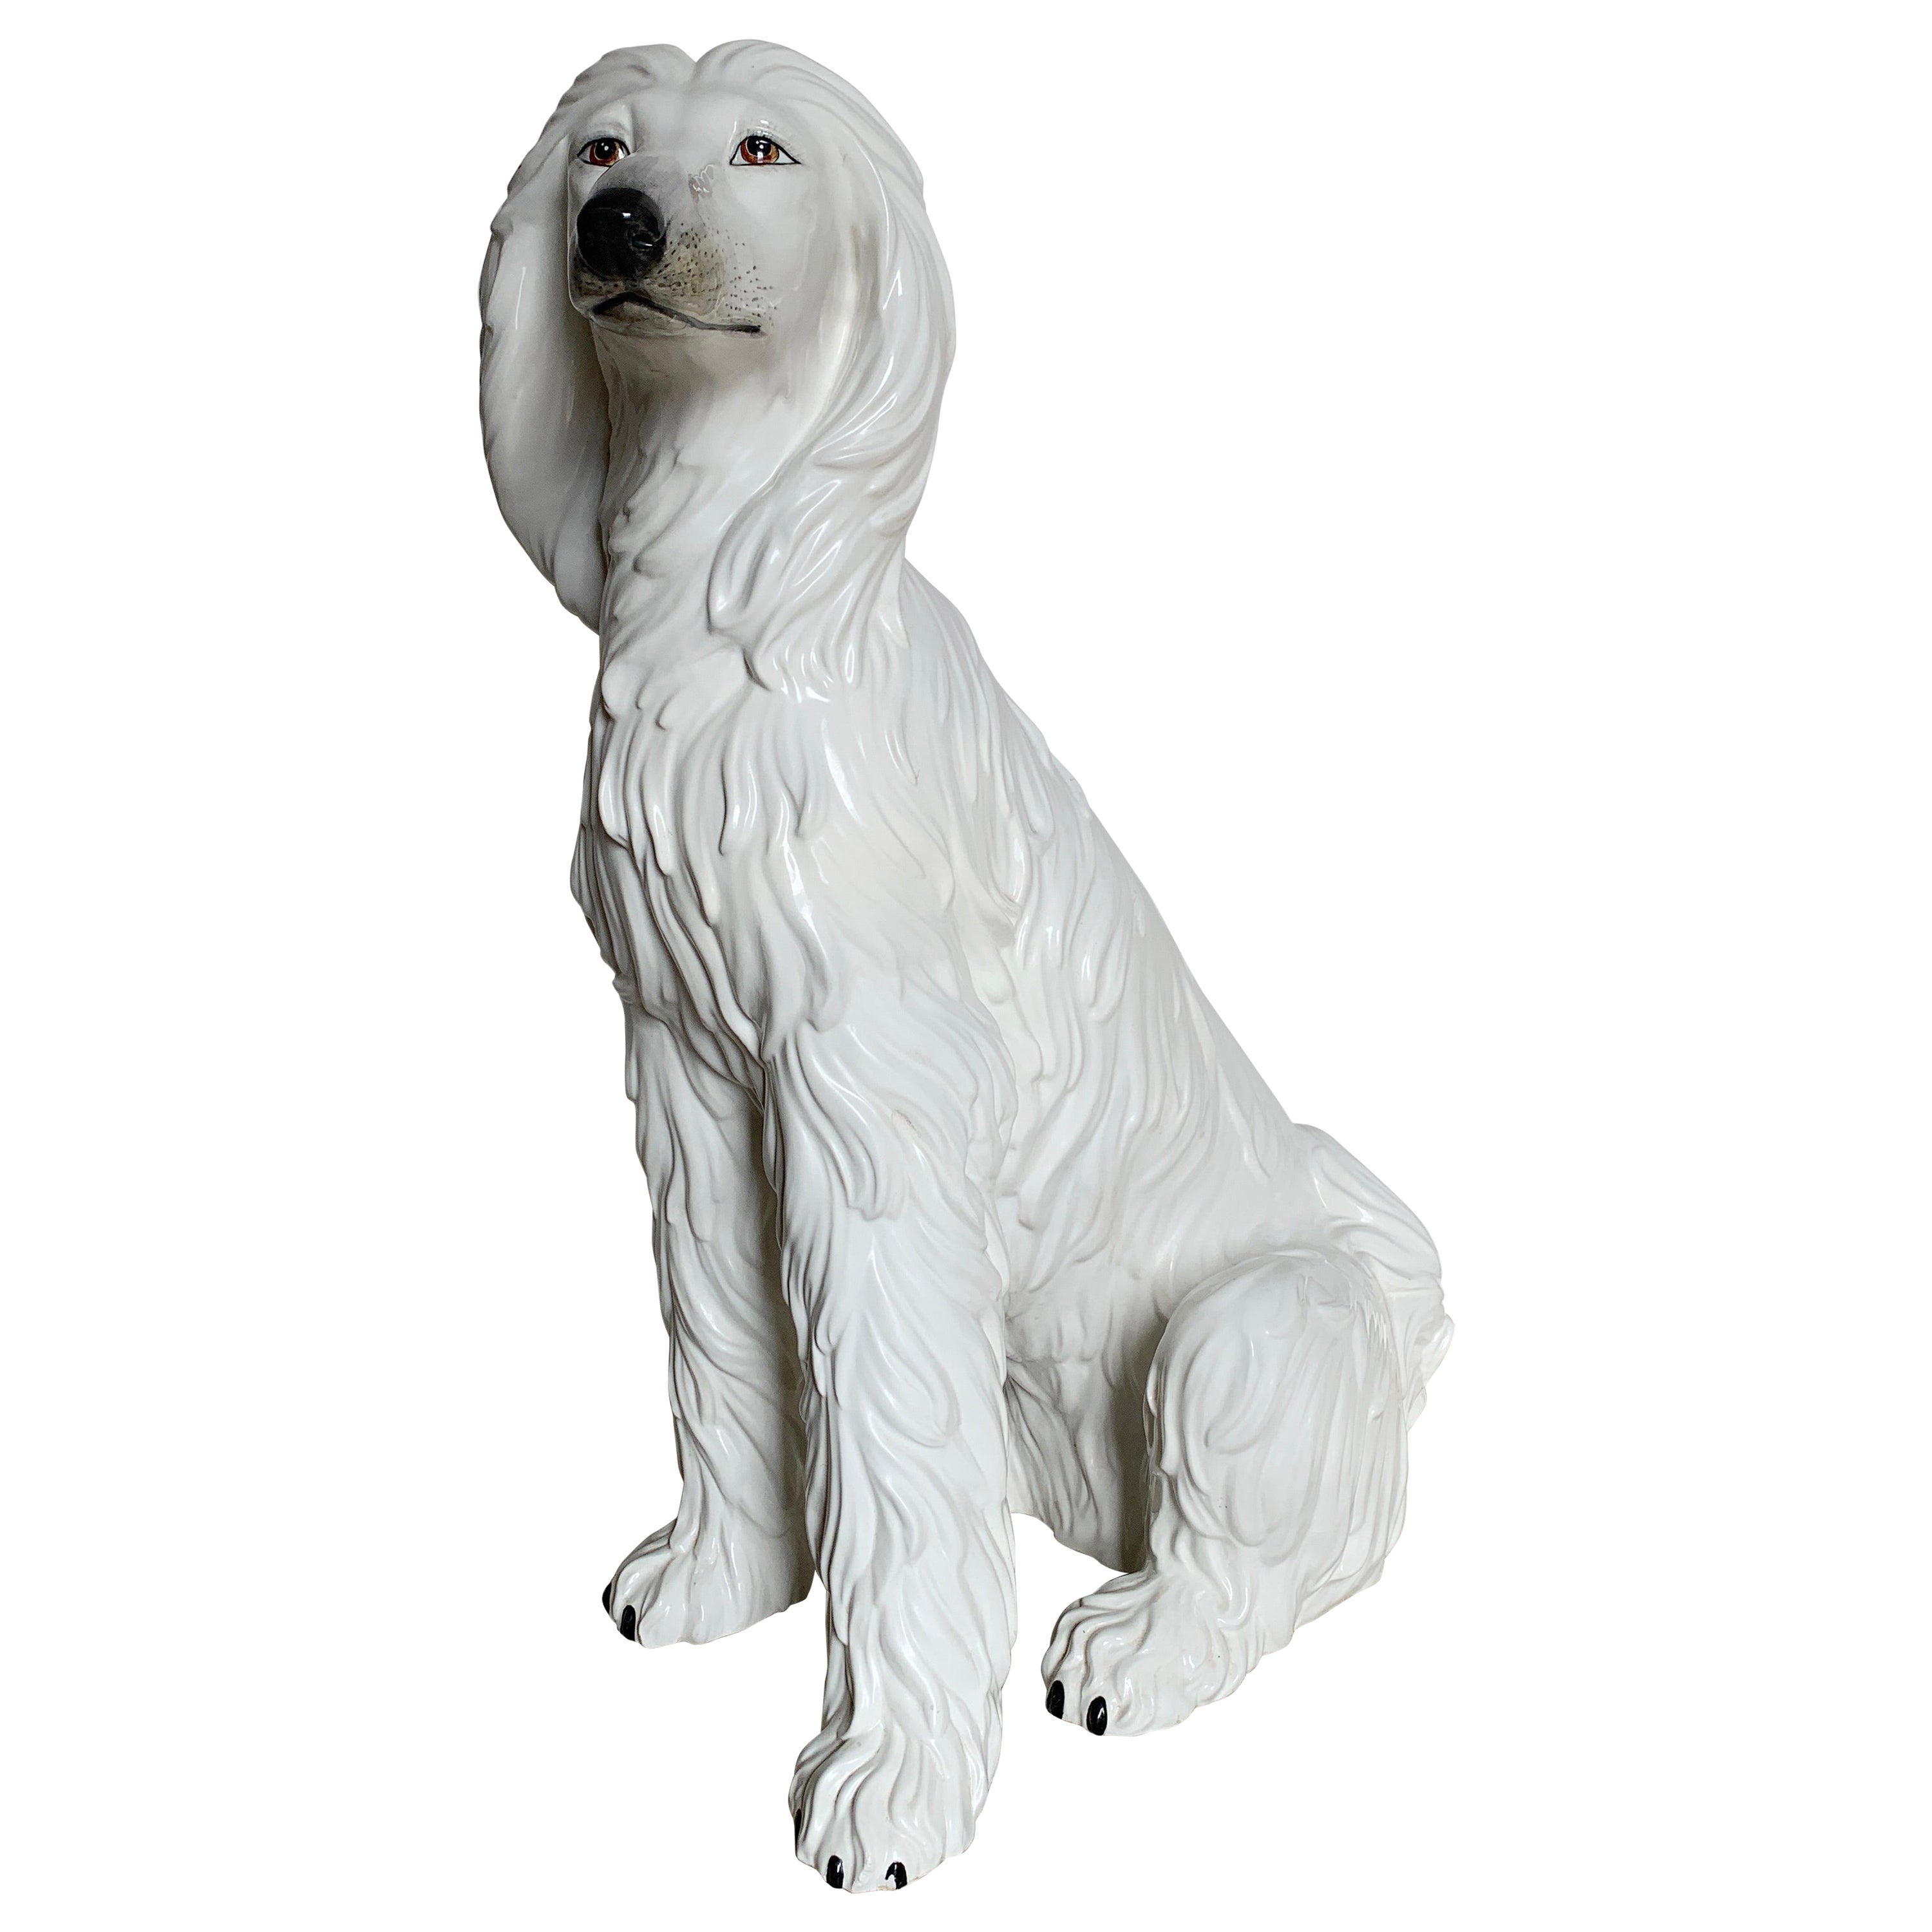 Afghan Hound Art Dog UK figurine with image of a dog on white marble 